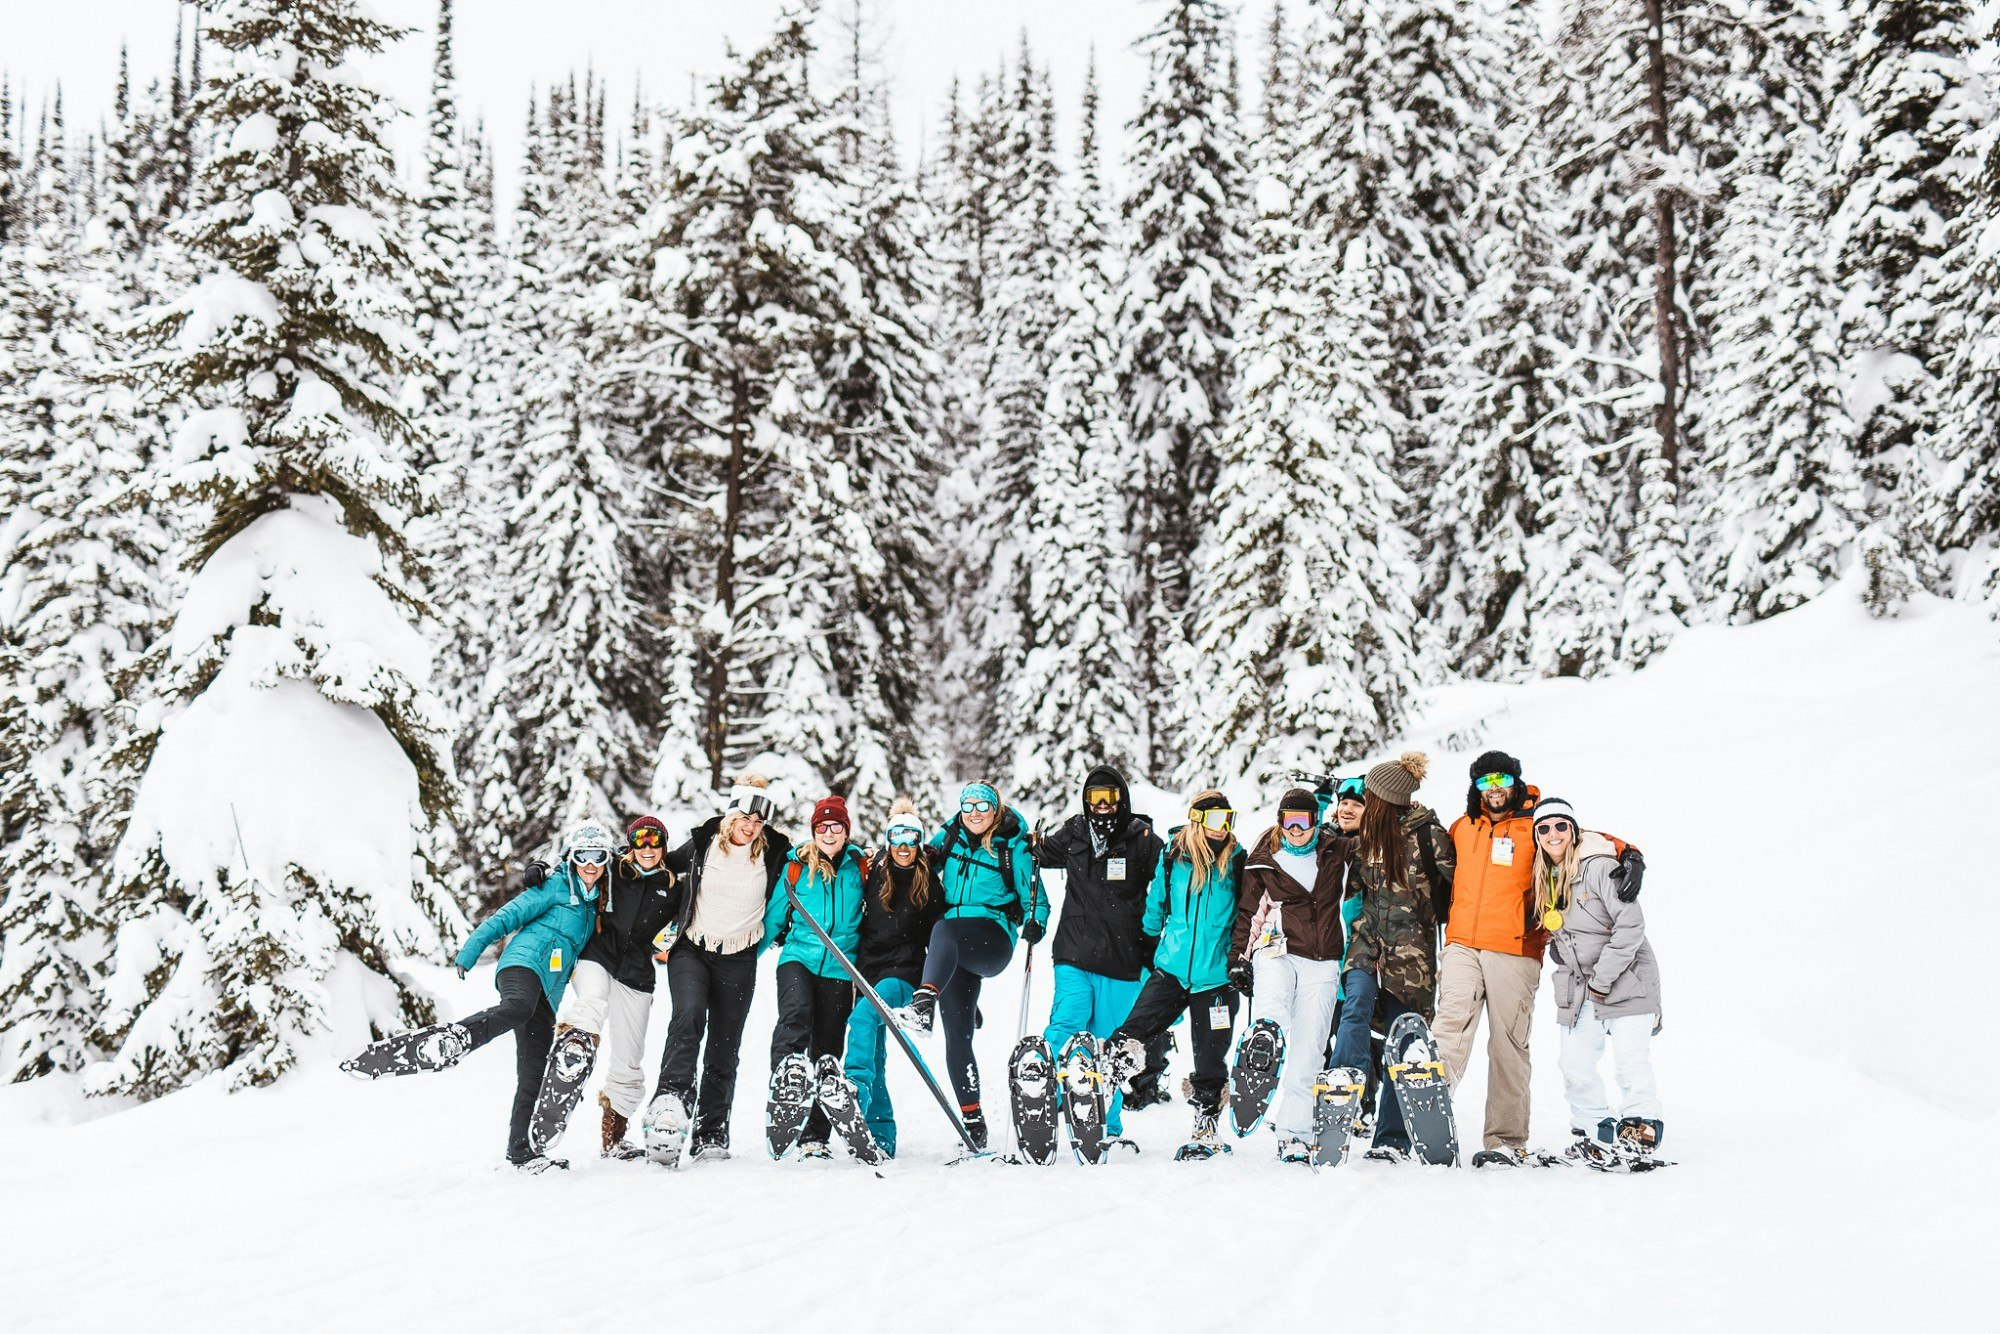 A large group of skiers standing in front of tall snow-covered trees